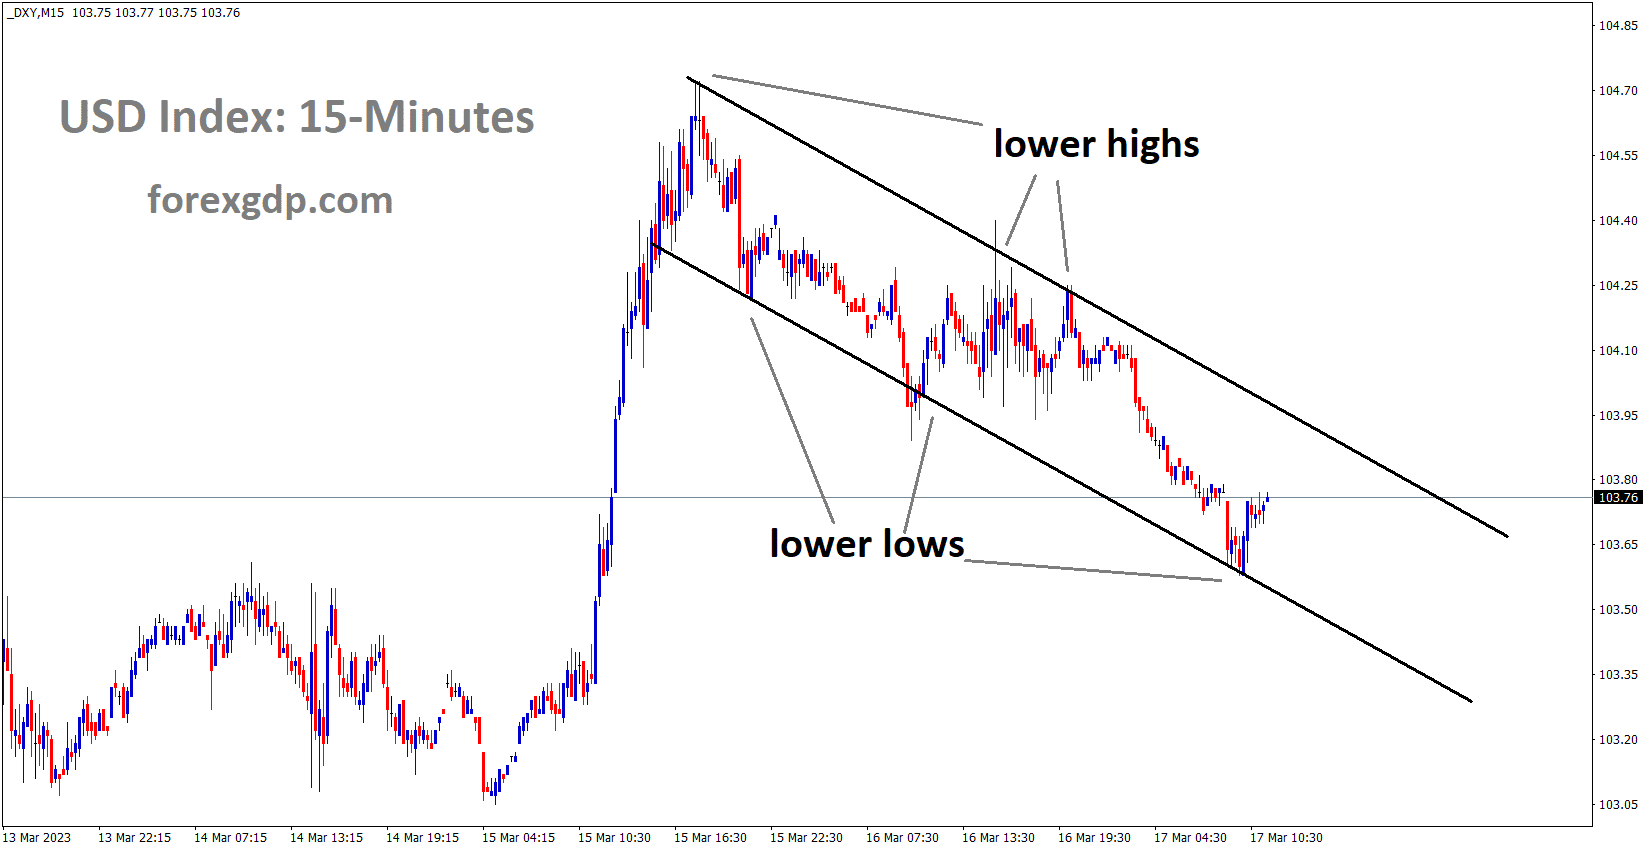 US Dollar Index is moving in the Descending channel and the market has rebounded from the lower low area of the channel